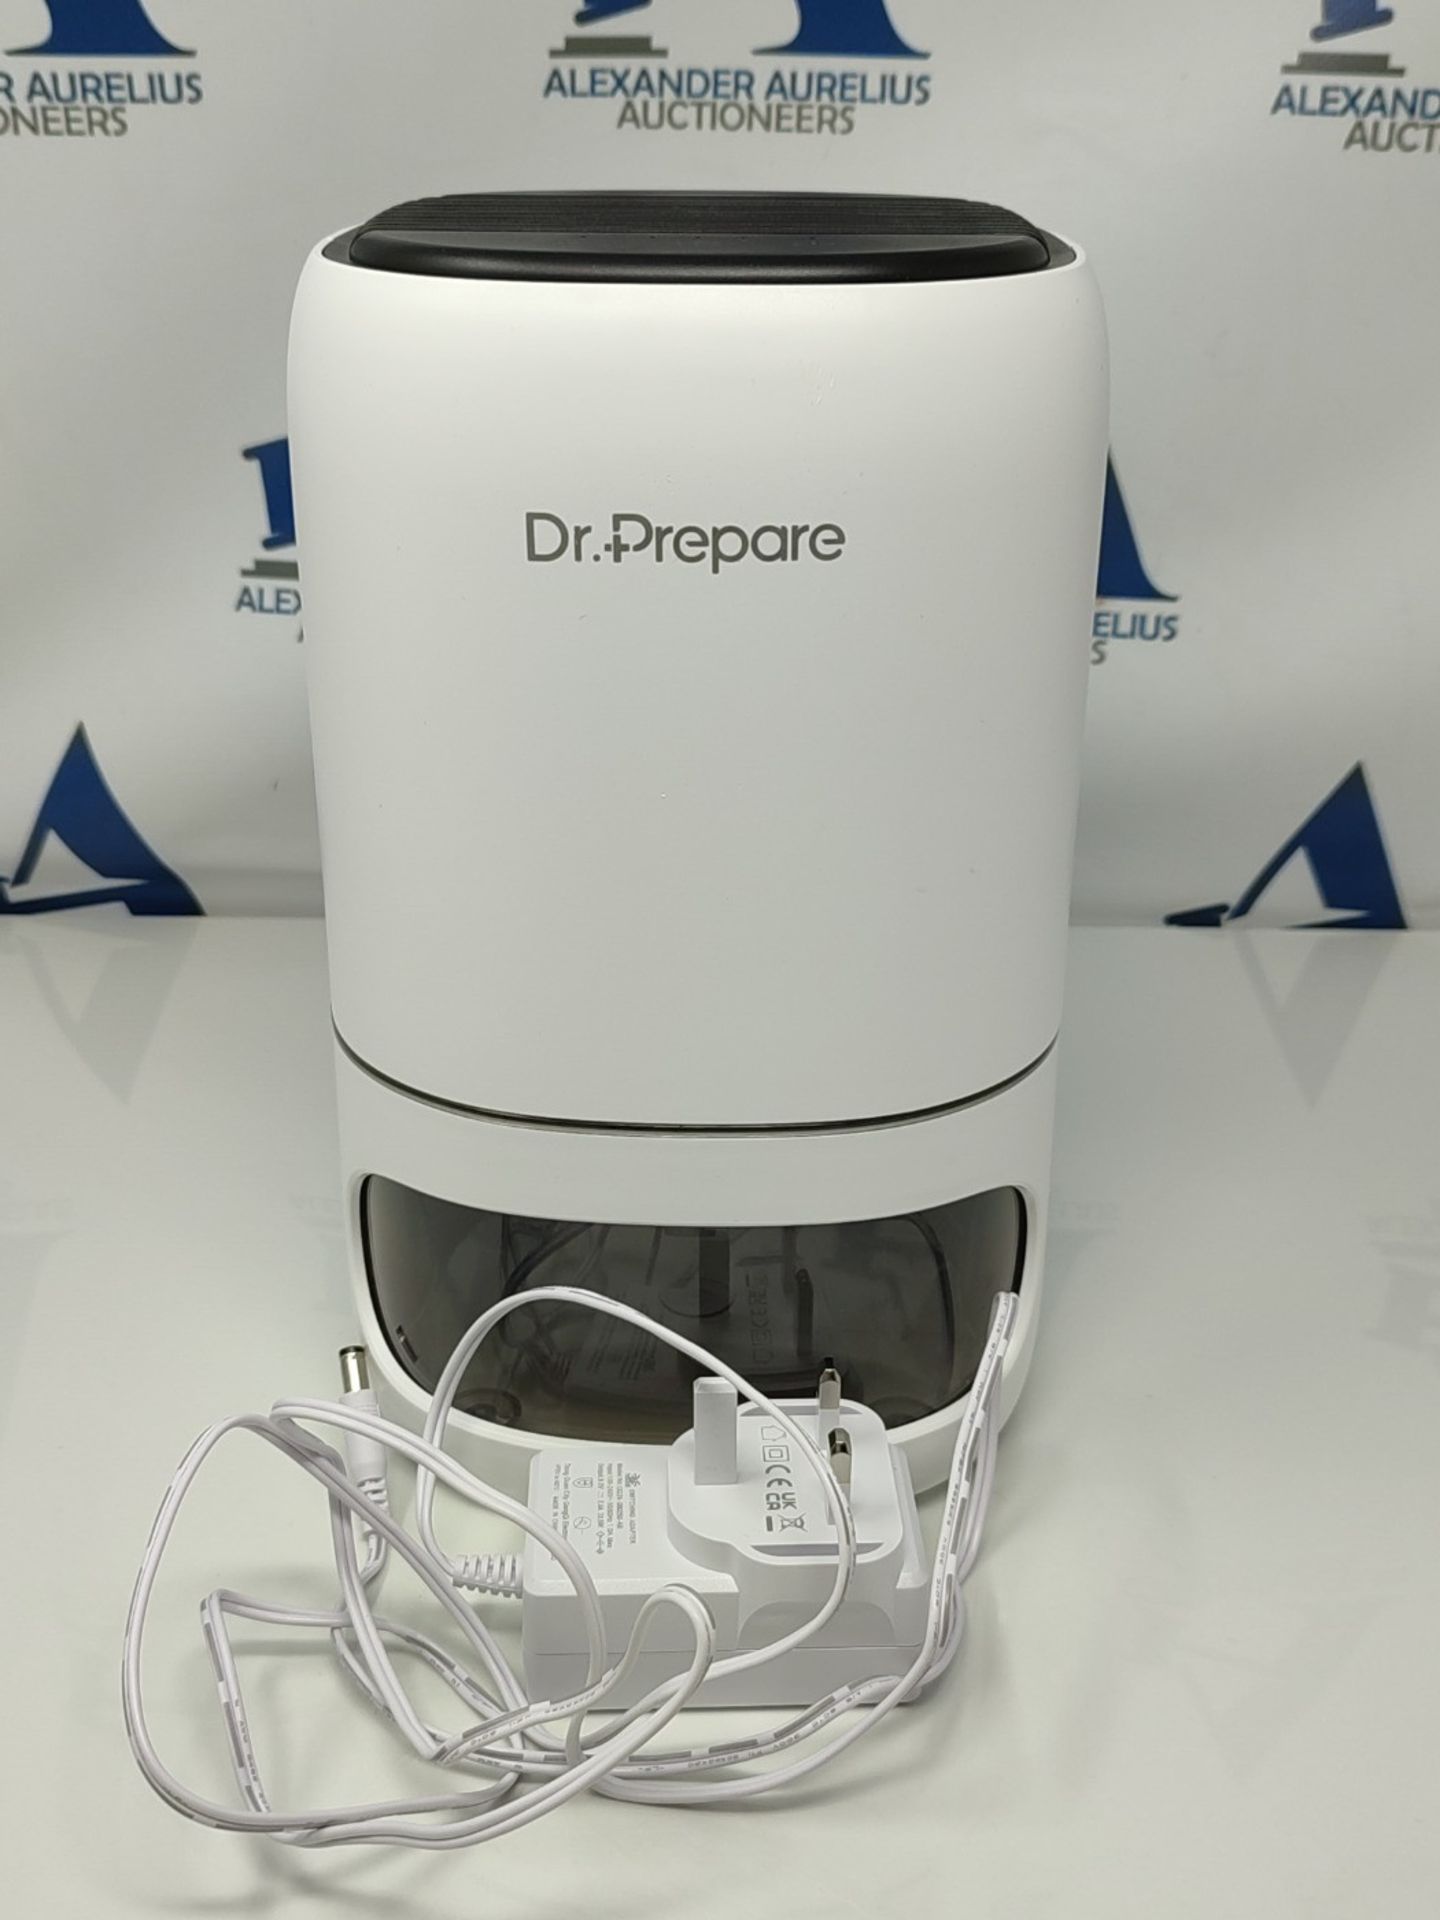 Dr.Prepare 1000ml Dehumidifiers for Home, 2-in-1 Dehumidifier and Air Purifier with Fi - Image 2 of 2